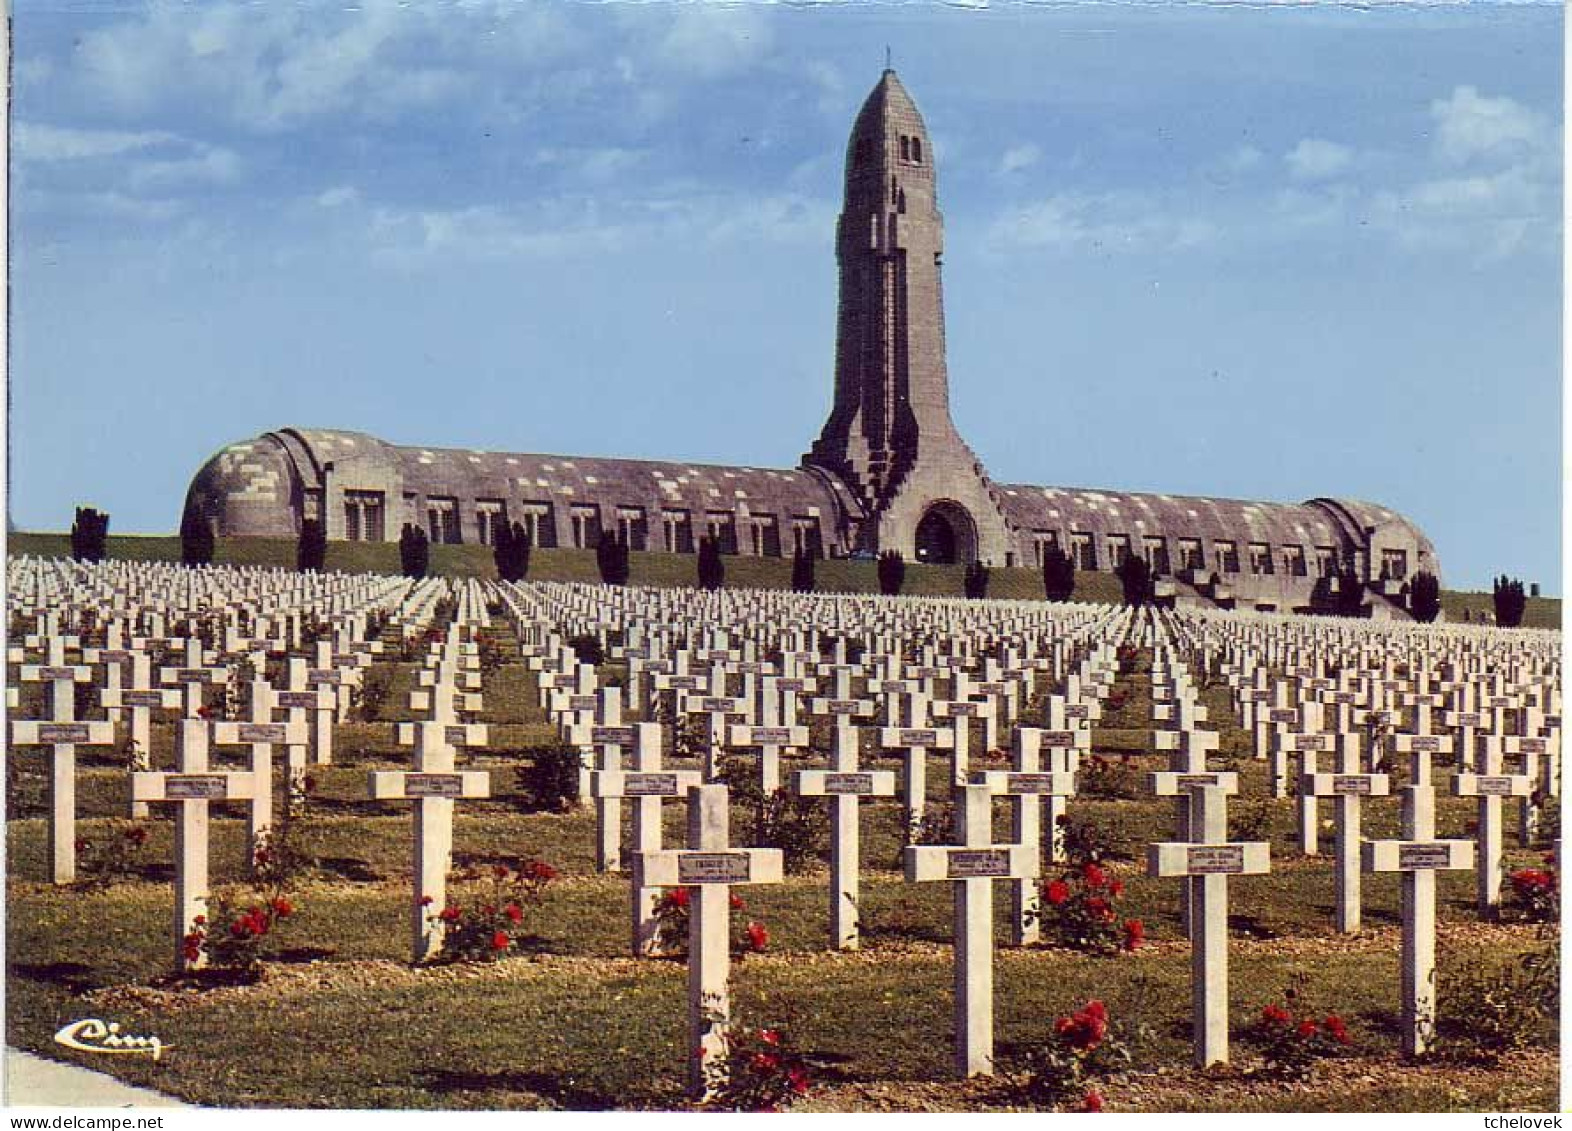 (55). Douaumont. Ossuaire 1935 & A 55.545.74 & A 55.545.12.70 & A 55.545.146 Fort & 114 & 56 & 9265W & (1) 1960